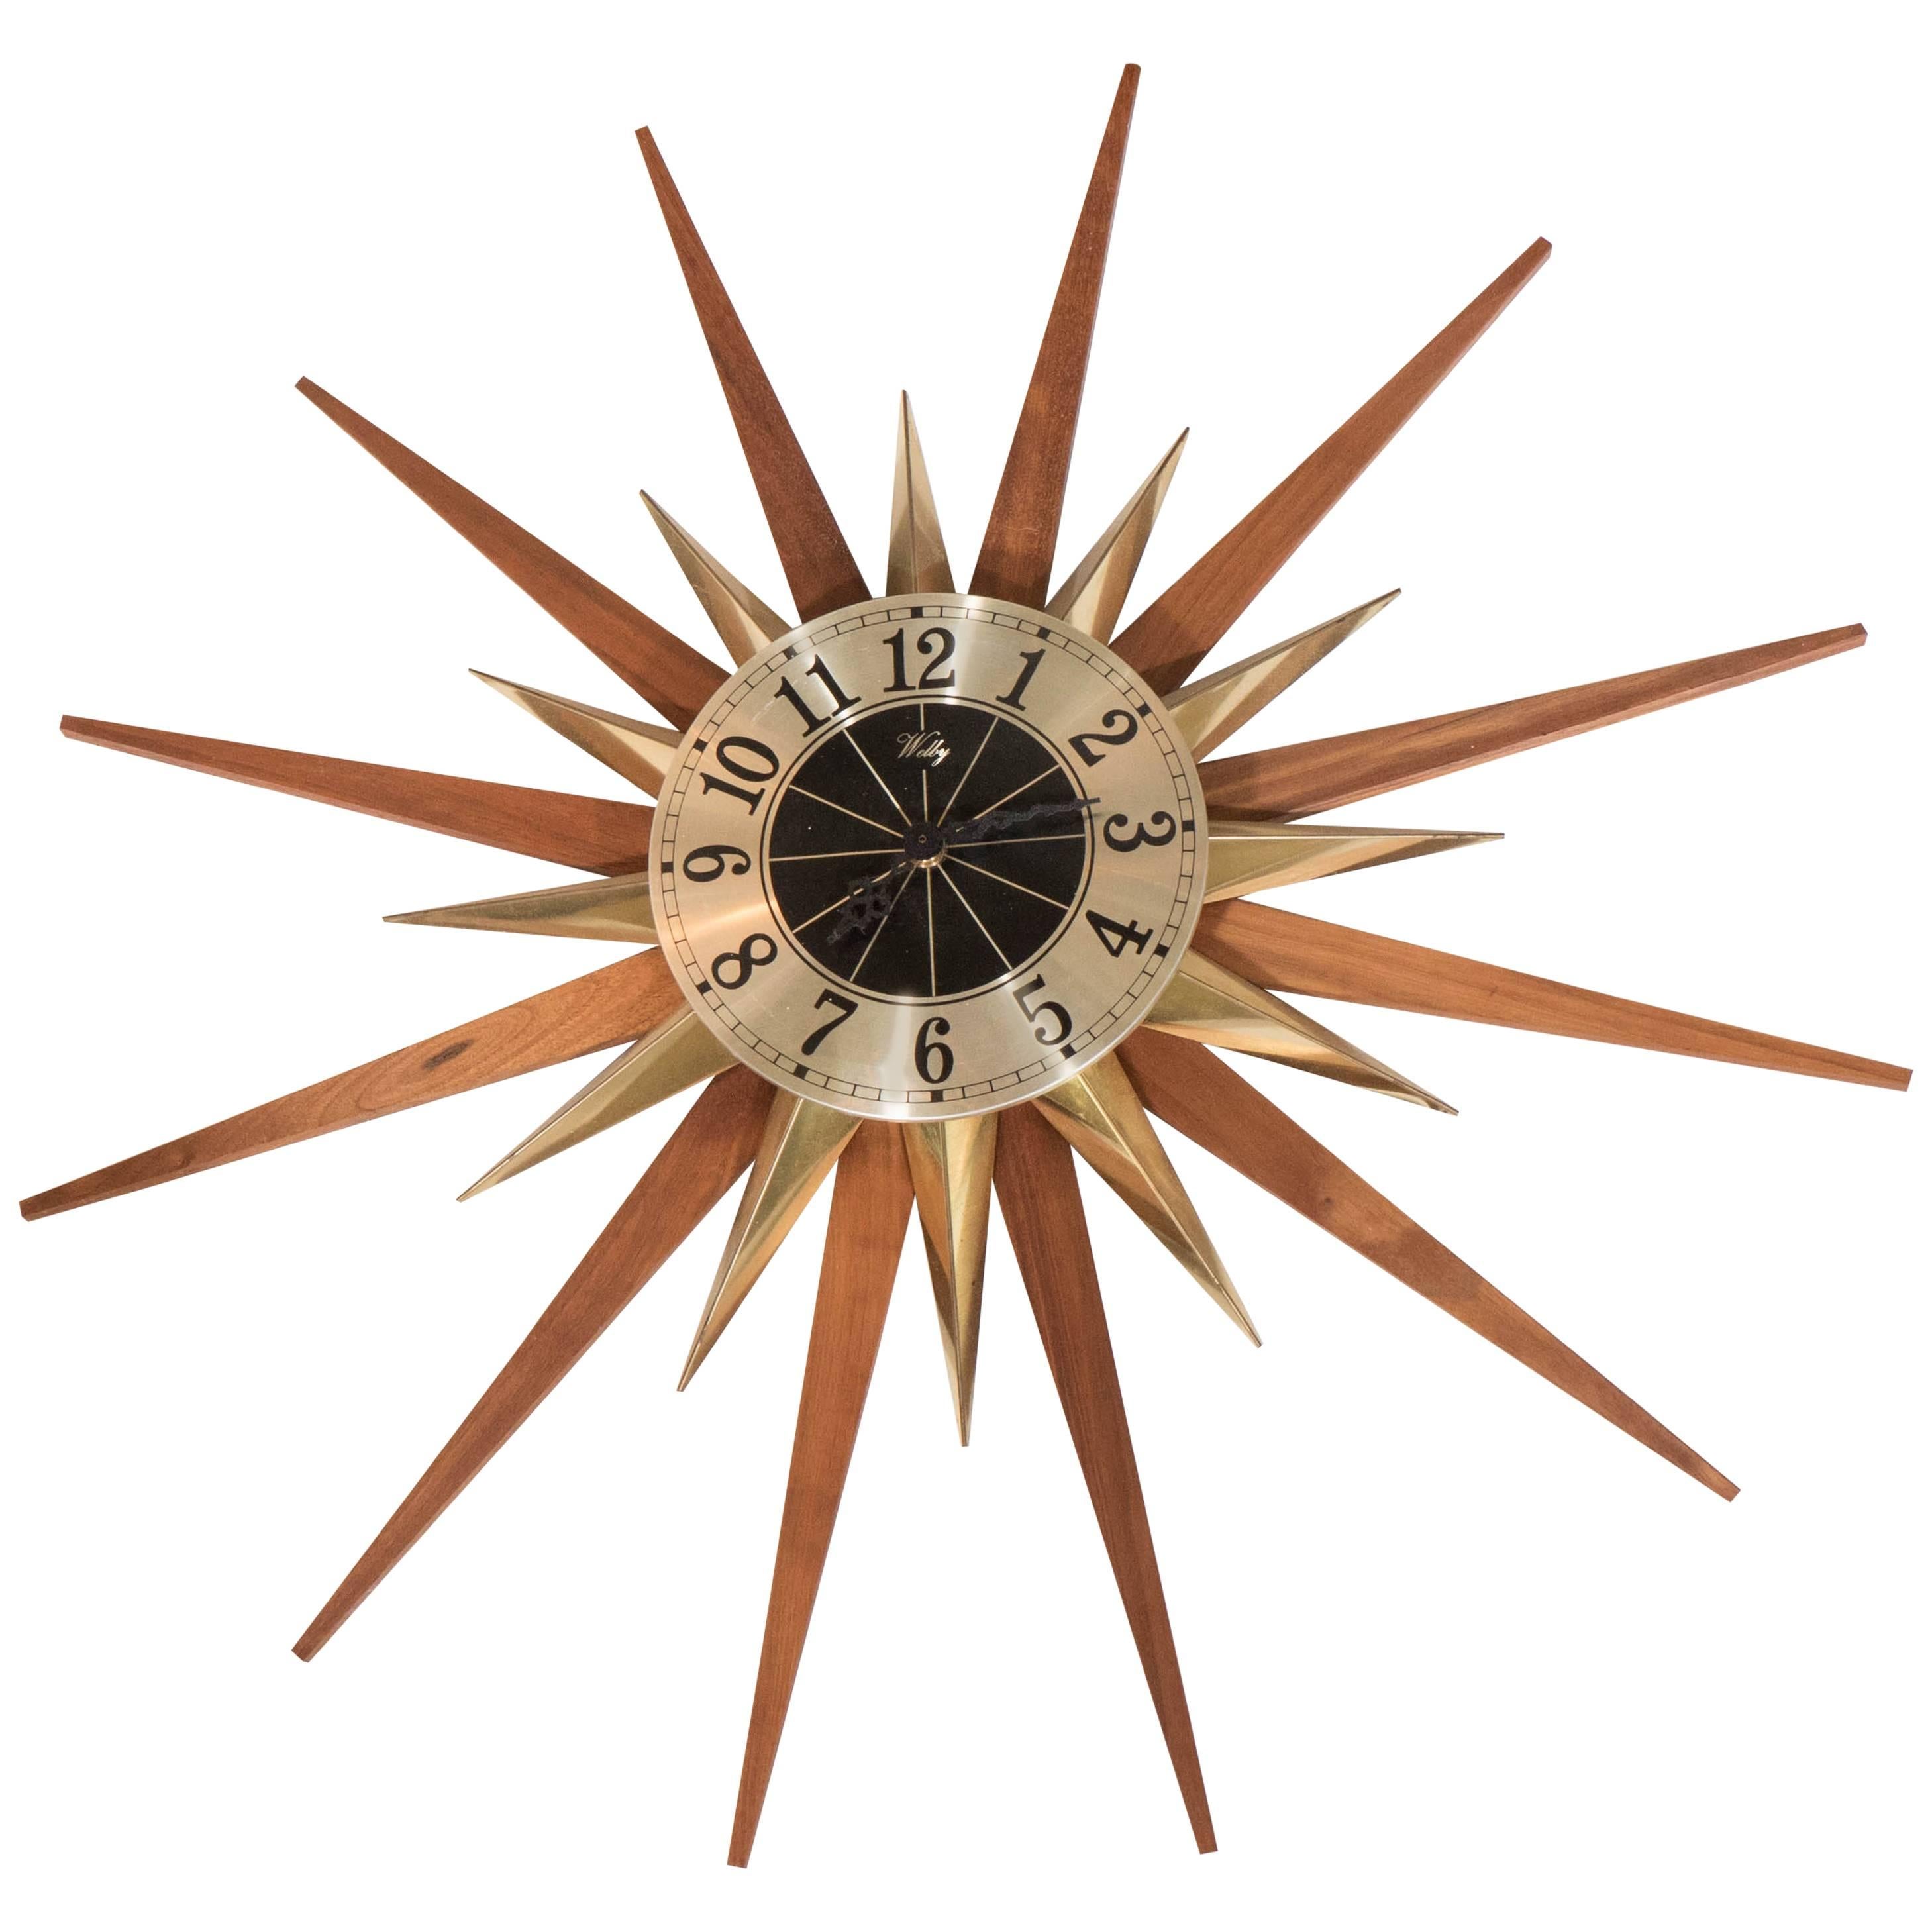 Starburst Wall Clock by Welby Division, Elgin National Watch Company